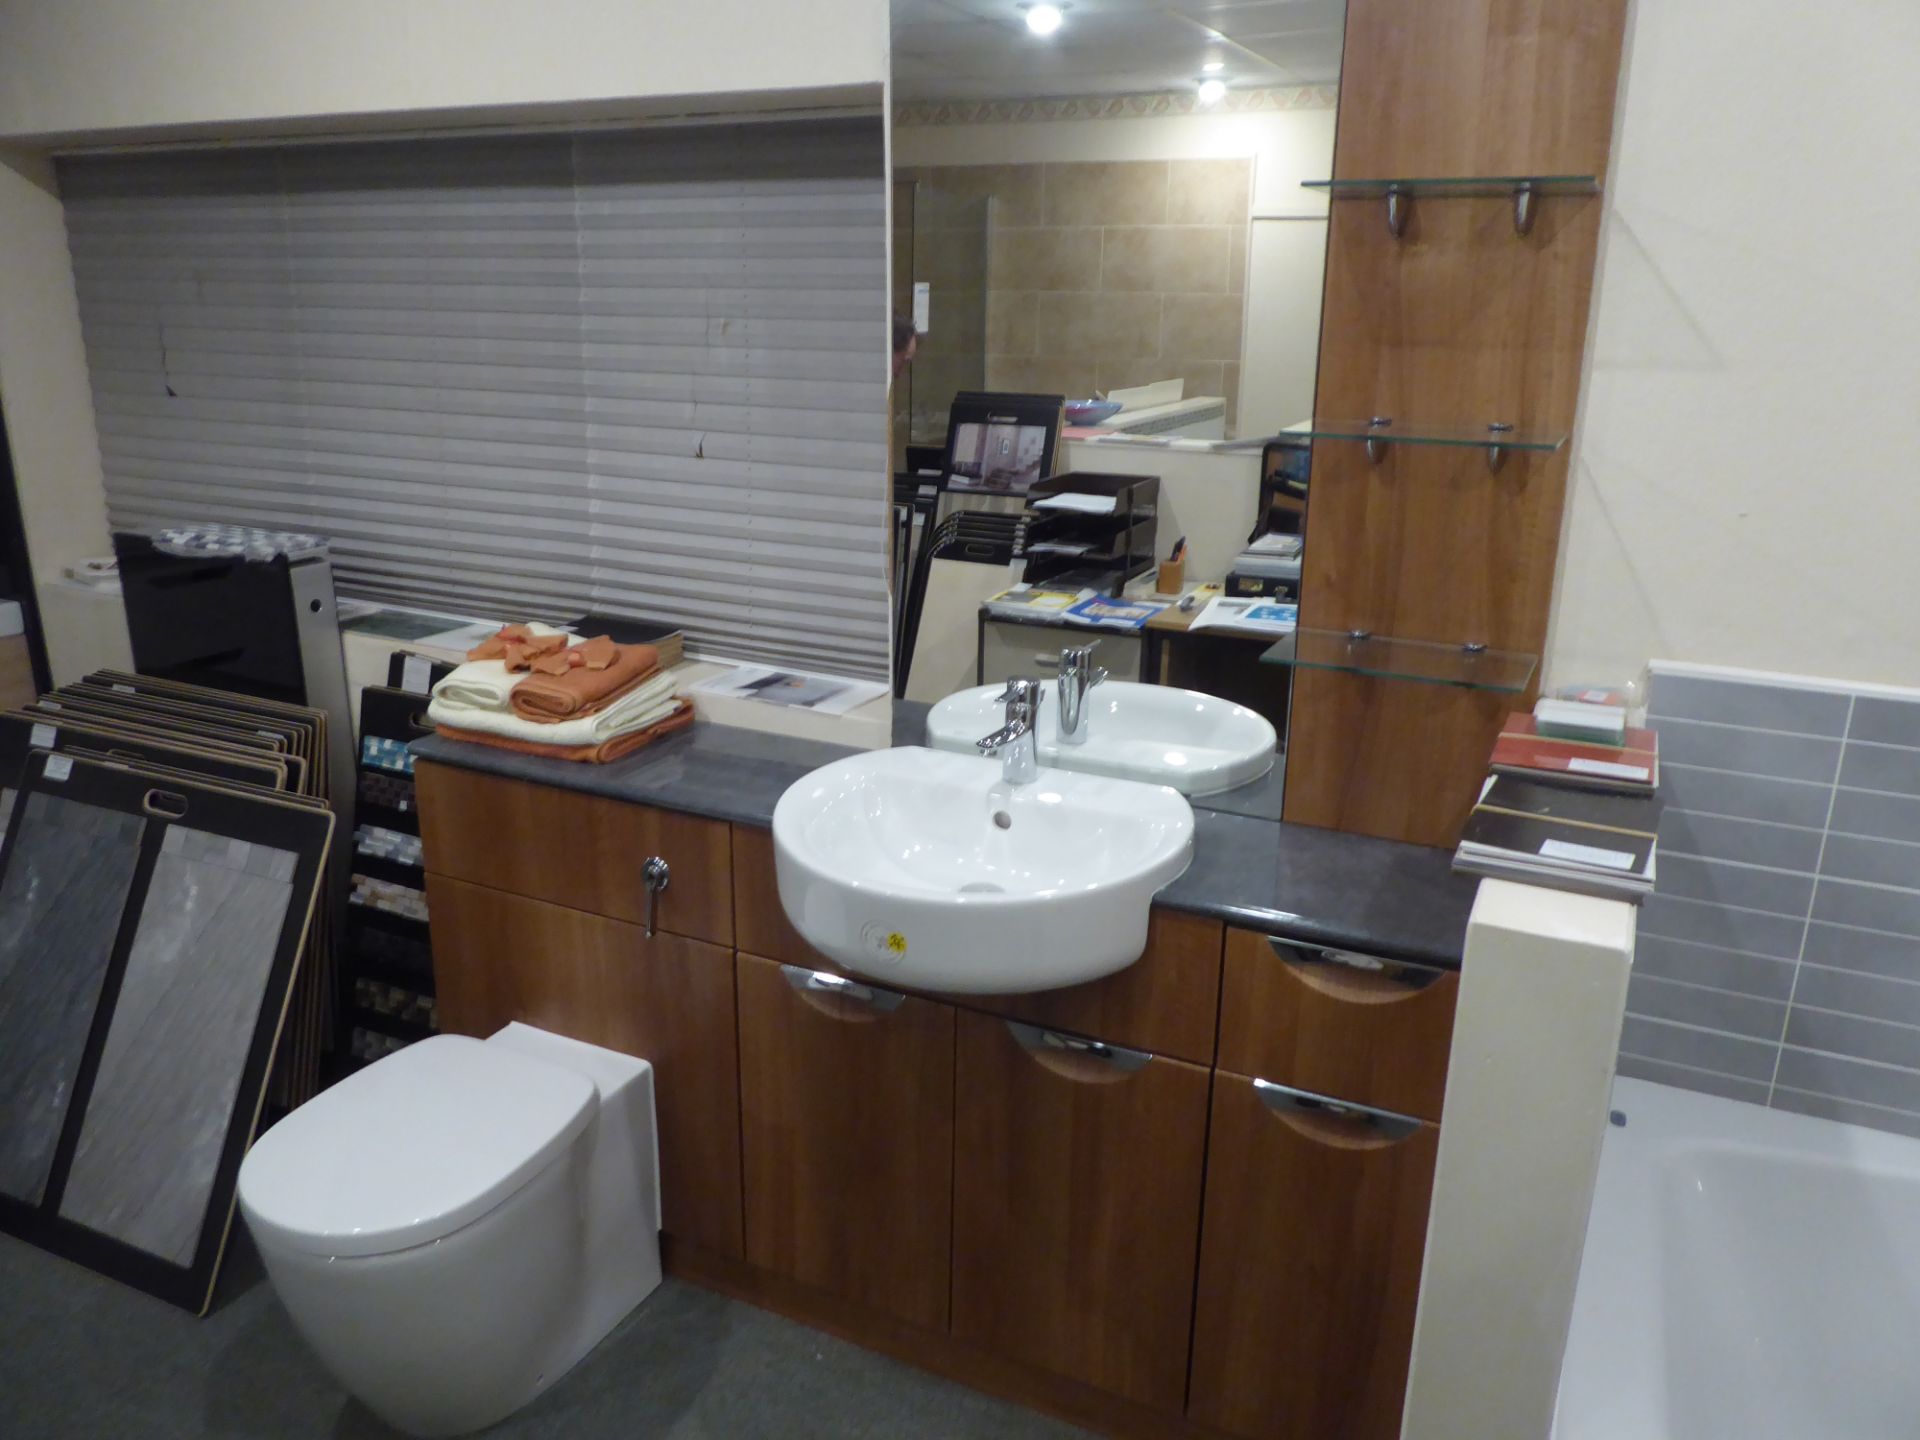 Semi counter top cloakroom in American Walnut with Ideal Standard Concept sphere basin and Aquablade - Image 2 of 2